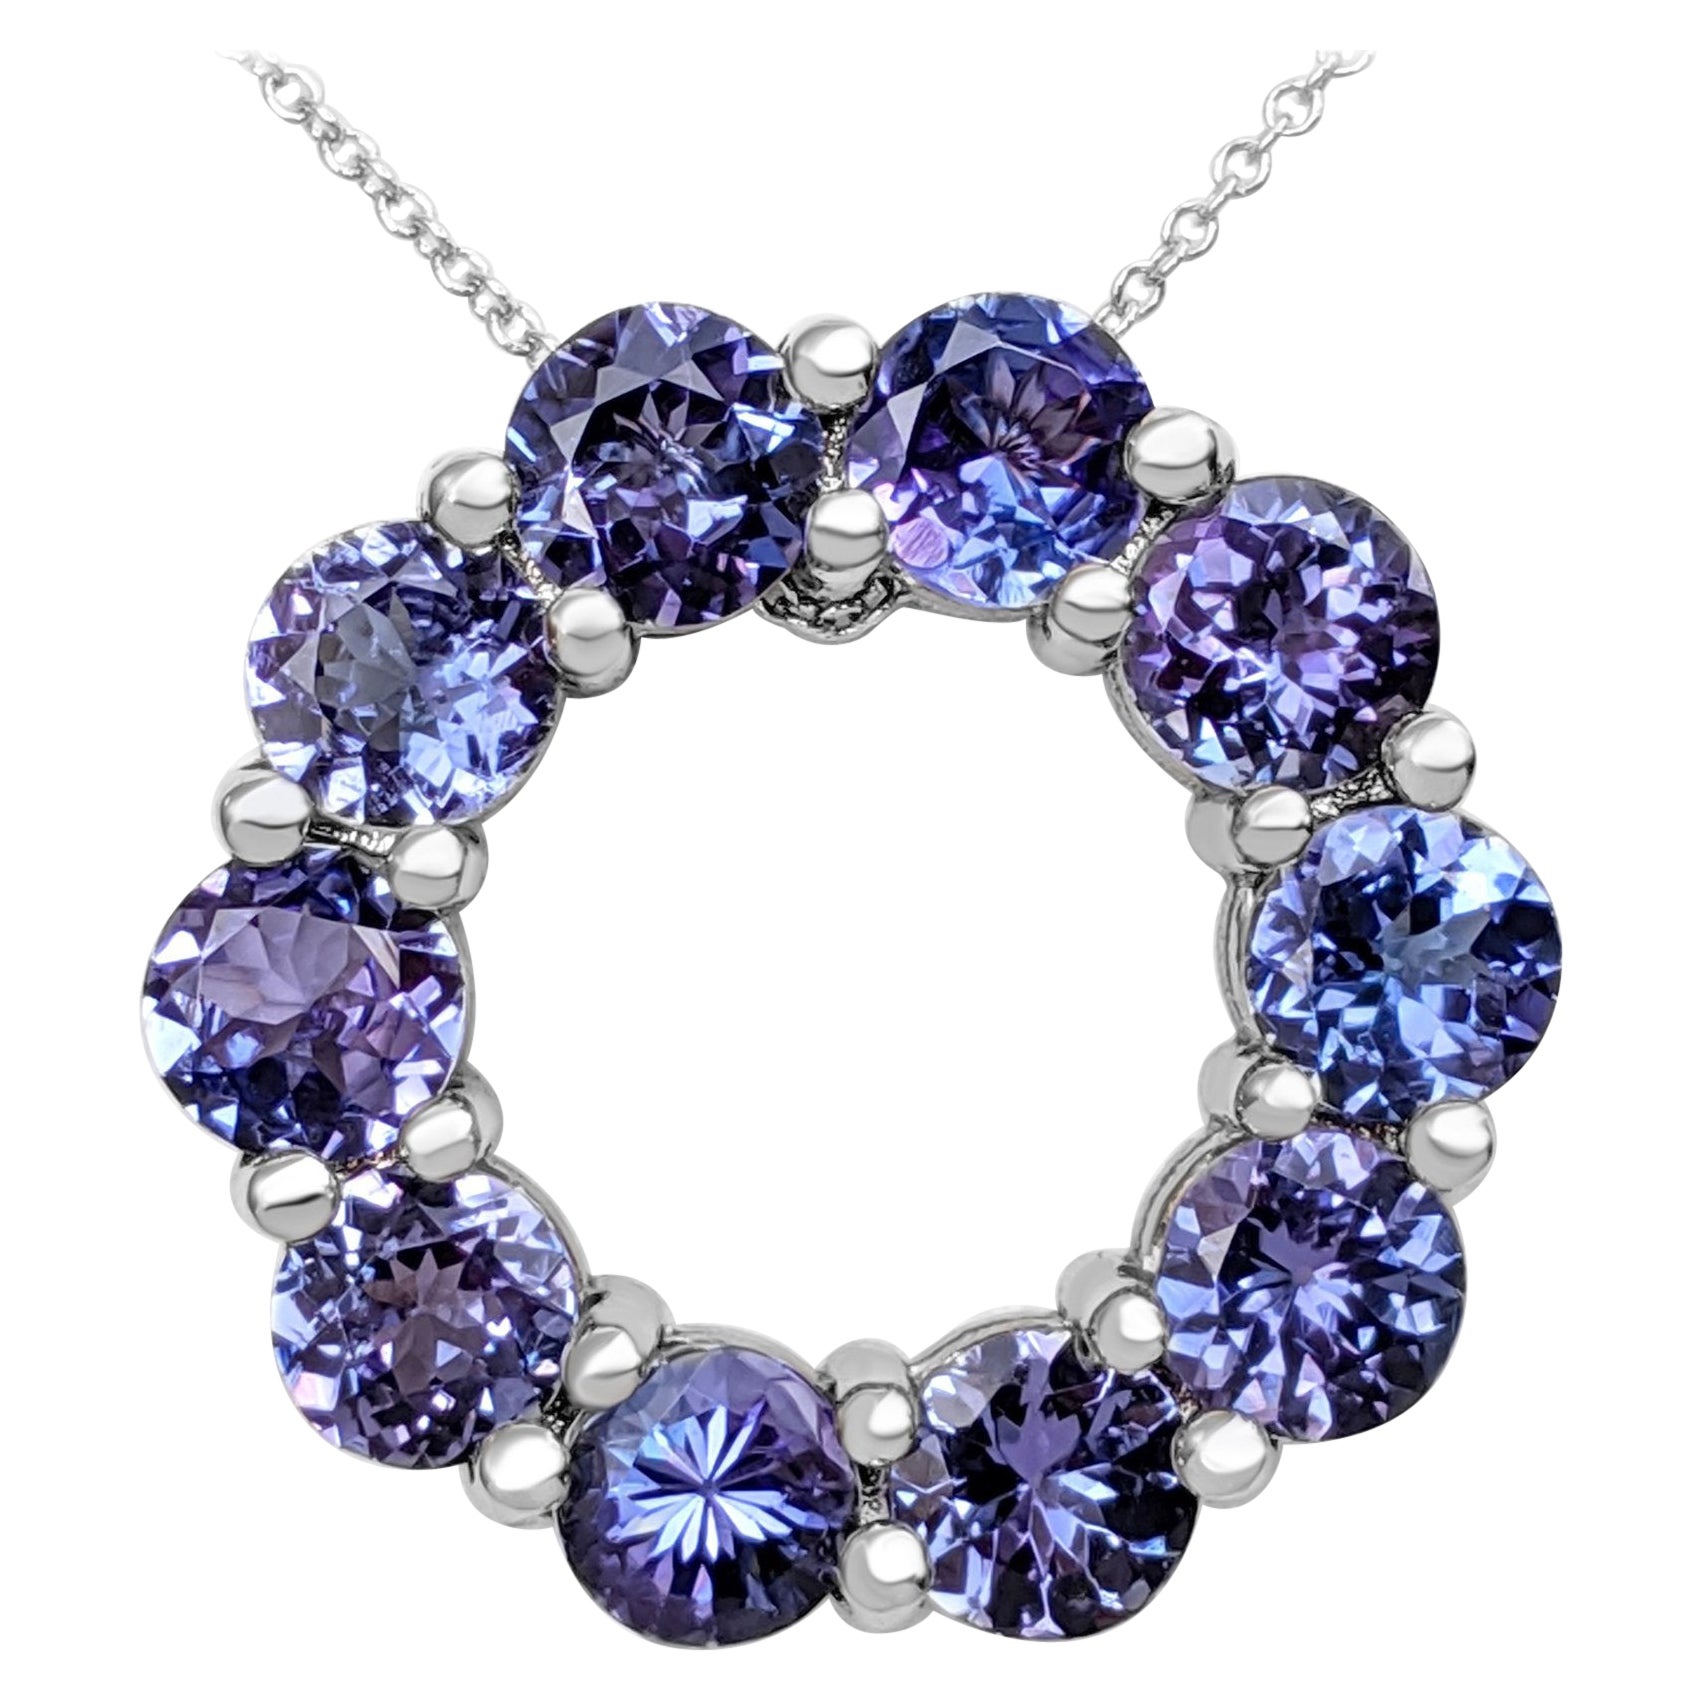 NO RESERVE! - 5.23cttw Tanzanite, 14K White Gold Necklace With Pendant